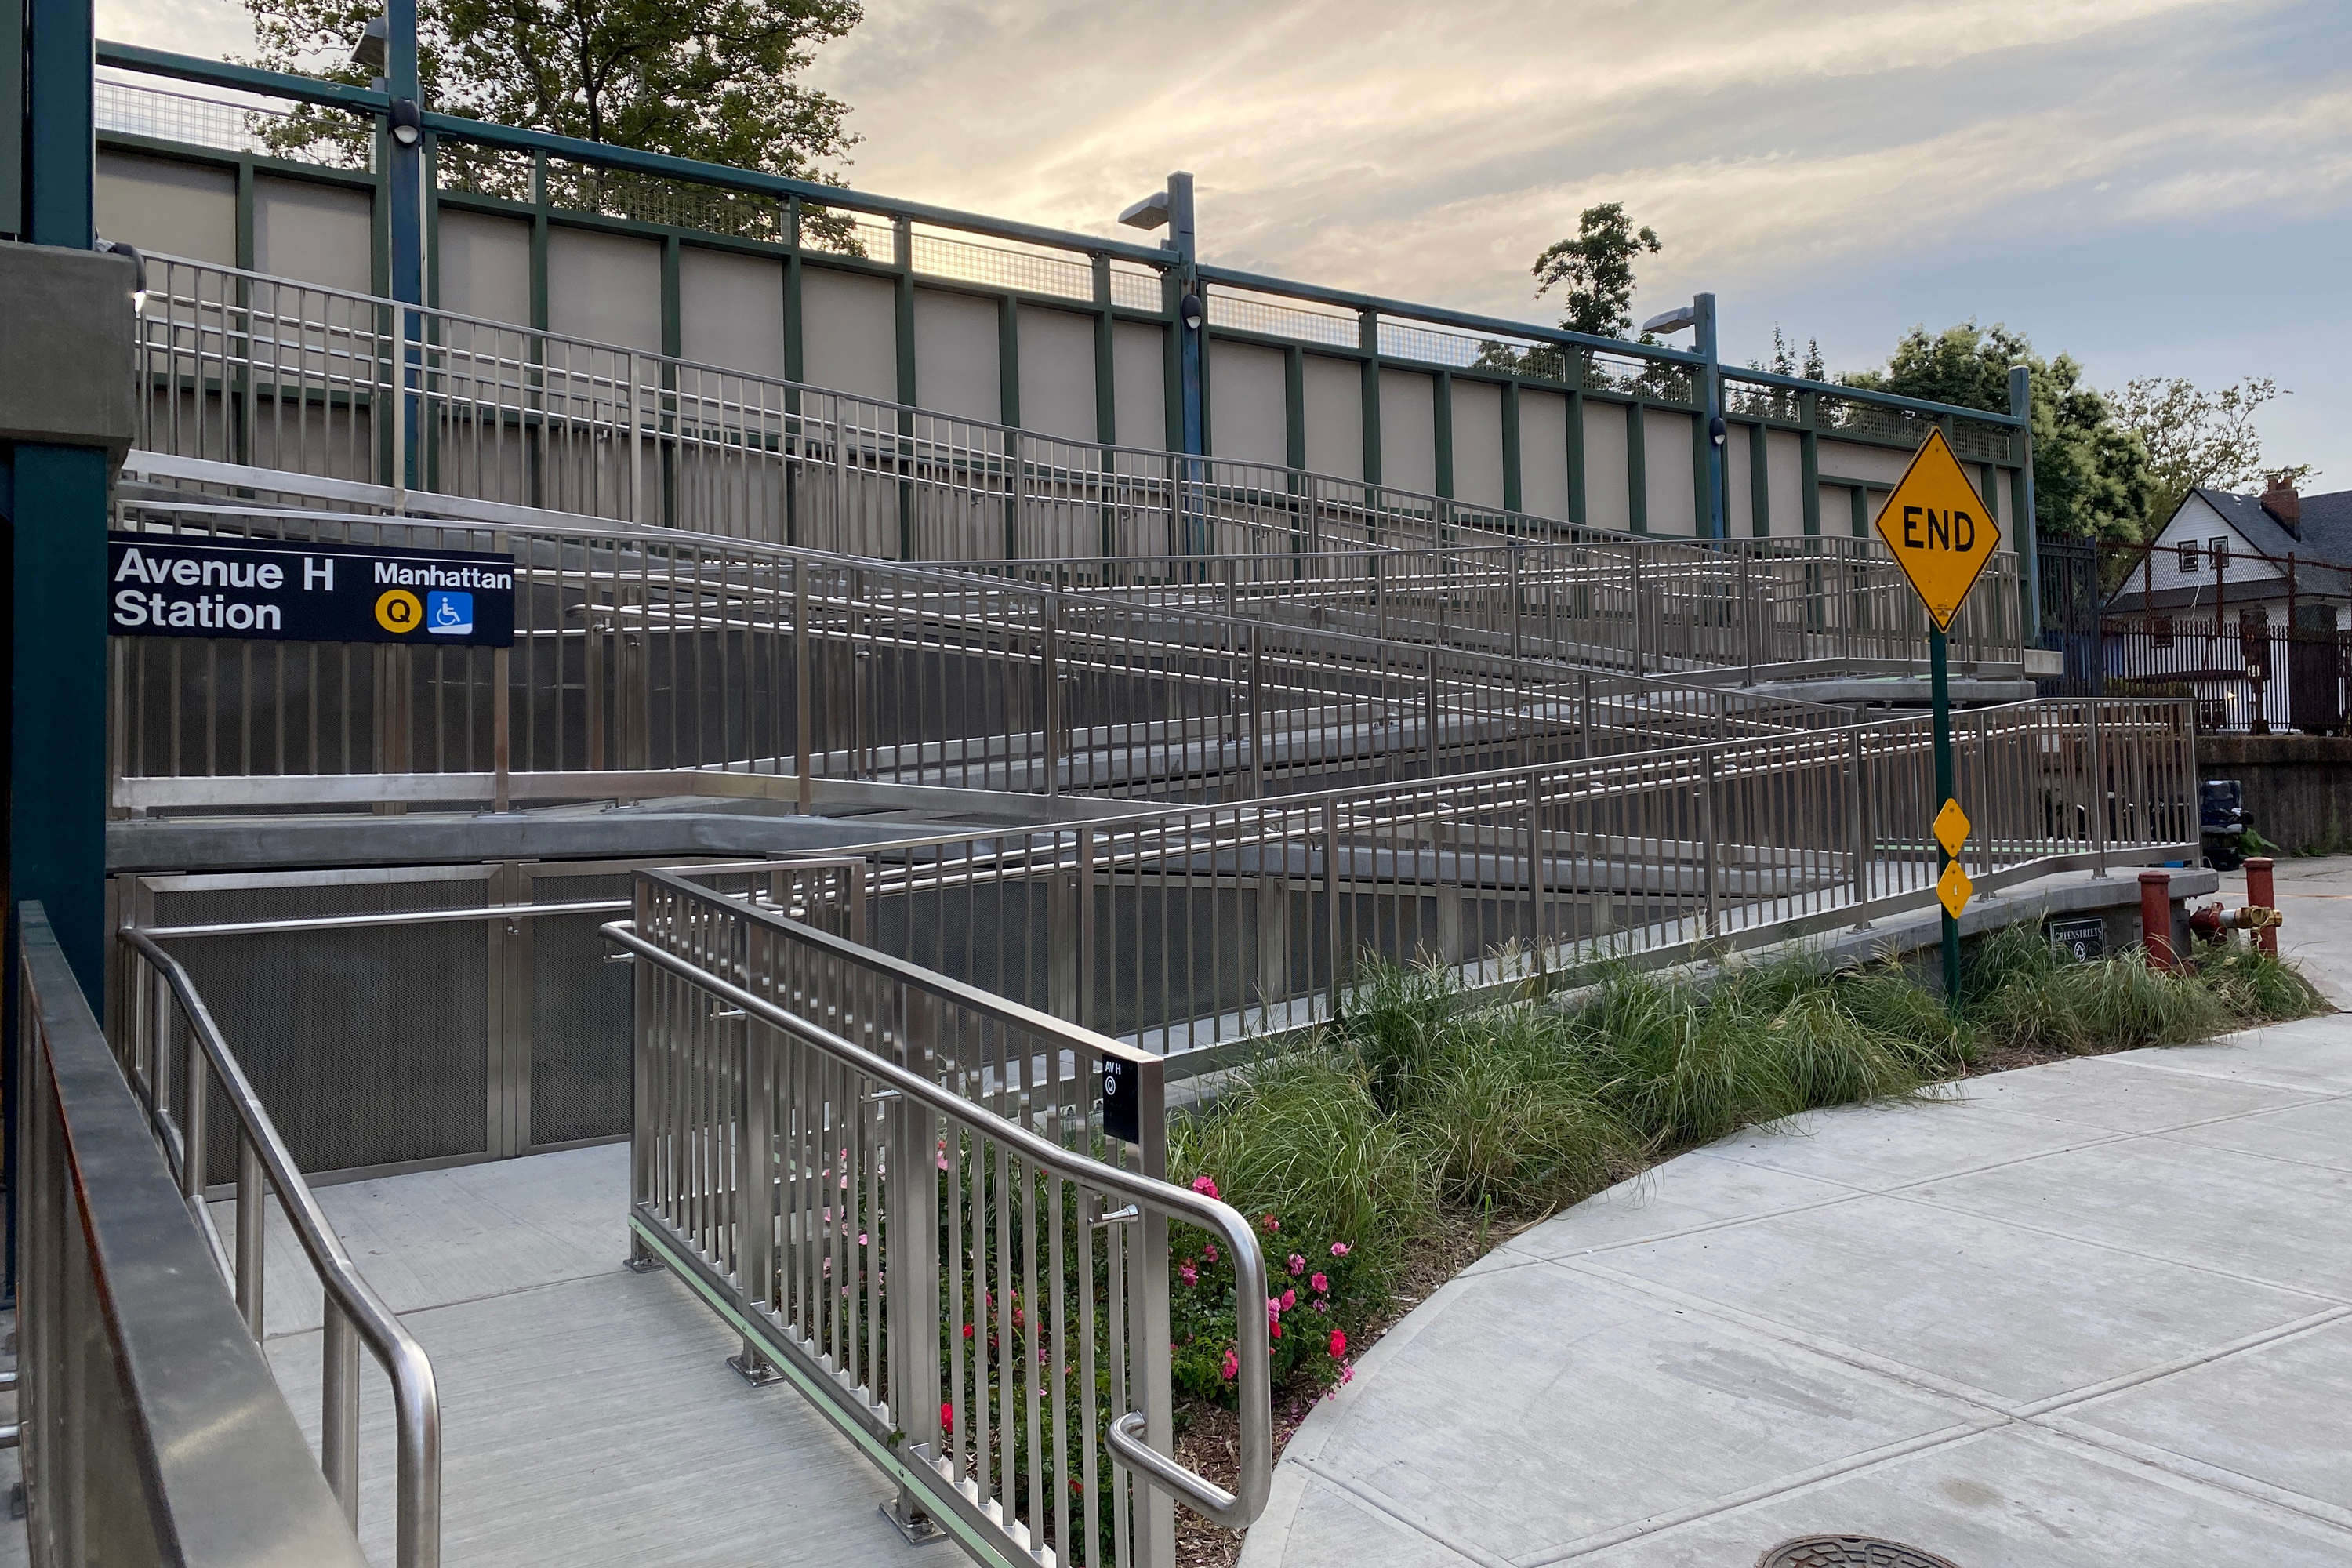 A newly installed wheelchair accessible ramp at the Ave H station of the Q Train in Brooklyn.